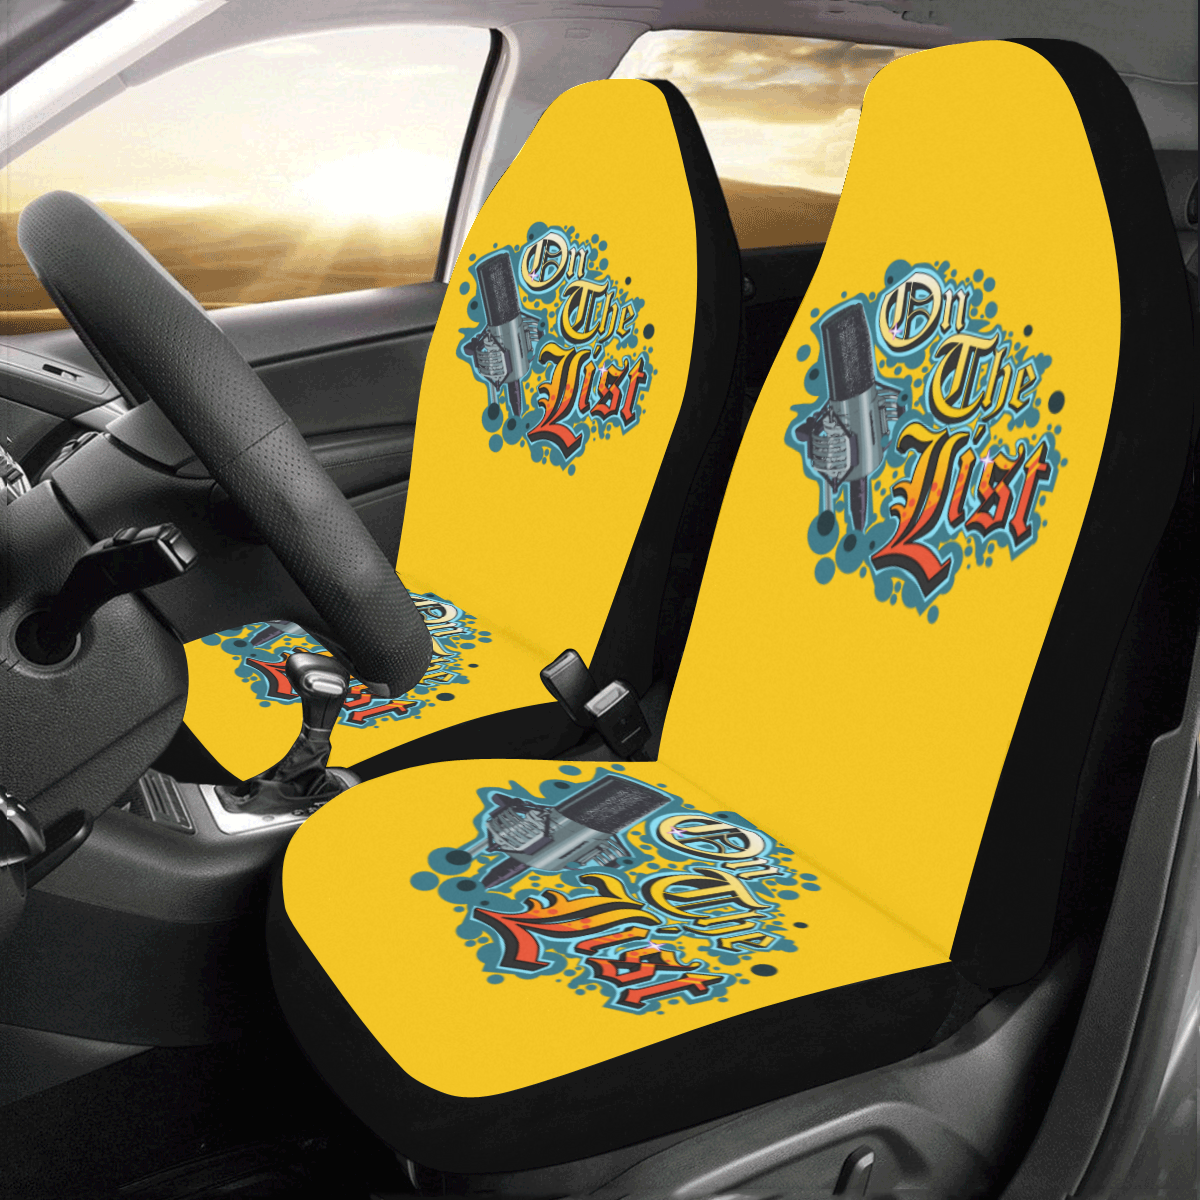 On The List Official Microphone Logo Seat Covers Car Seat Covers (Set of 2)